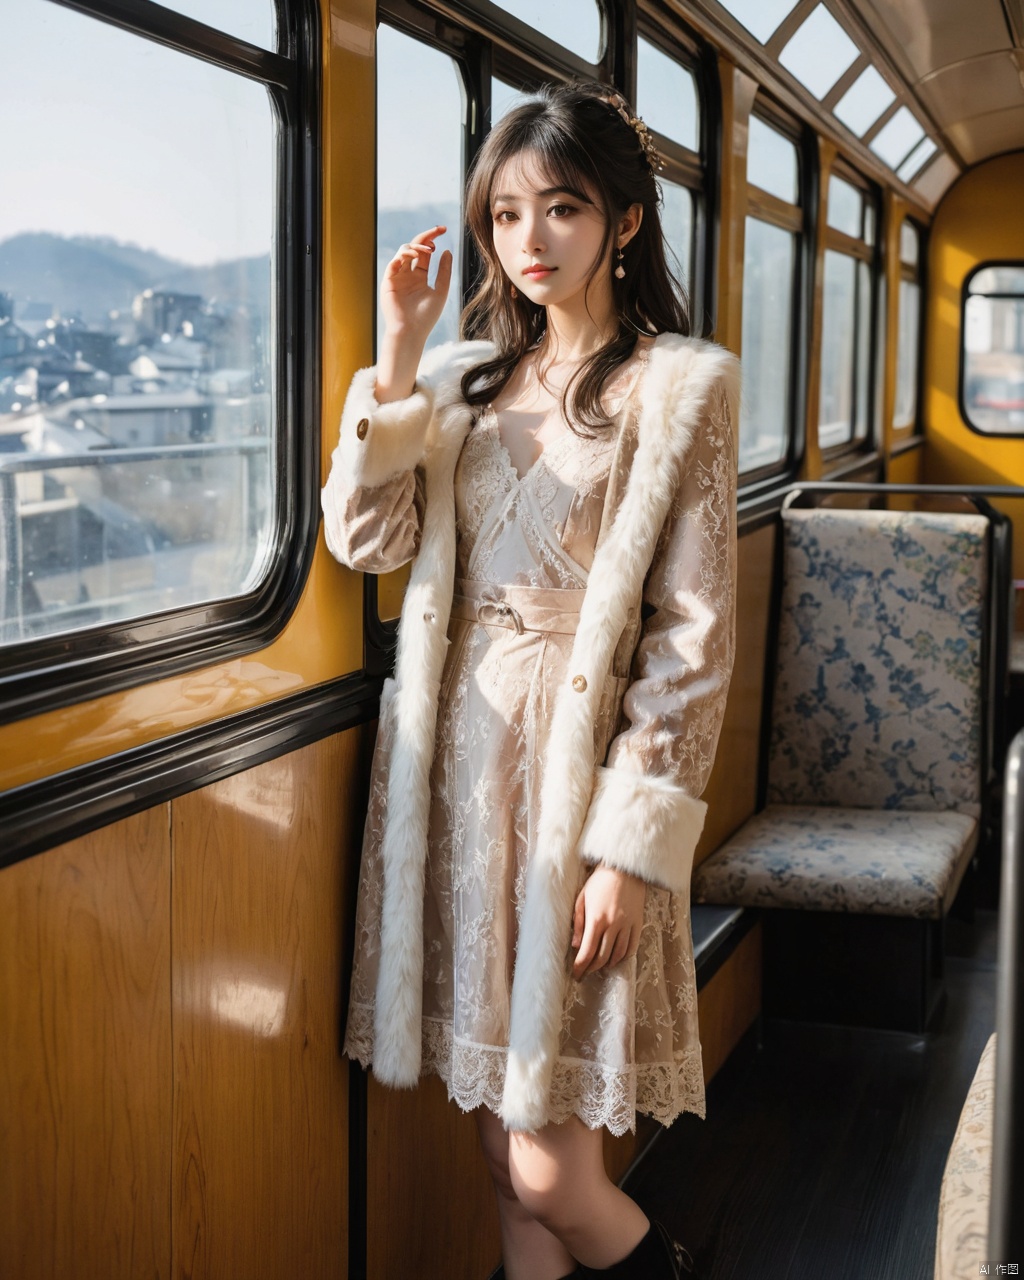 (masterpiece,best quality,ultra highres:1.1),uncensored,prefect lighting,side_light,very aesthetic,rating_explicit BREAK
1girl 18yo,japanese_actress,slim waist,(portrait:1.5),
,,
,zhongtiaocaiwei,
(Faux_fur_coat:1.5),(Lace_trimmed_slip_dress:1.4),(Velvet_ankle_boots:1.3),in a bus,,sunlight through the glass to form a beam,outdoors,